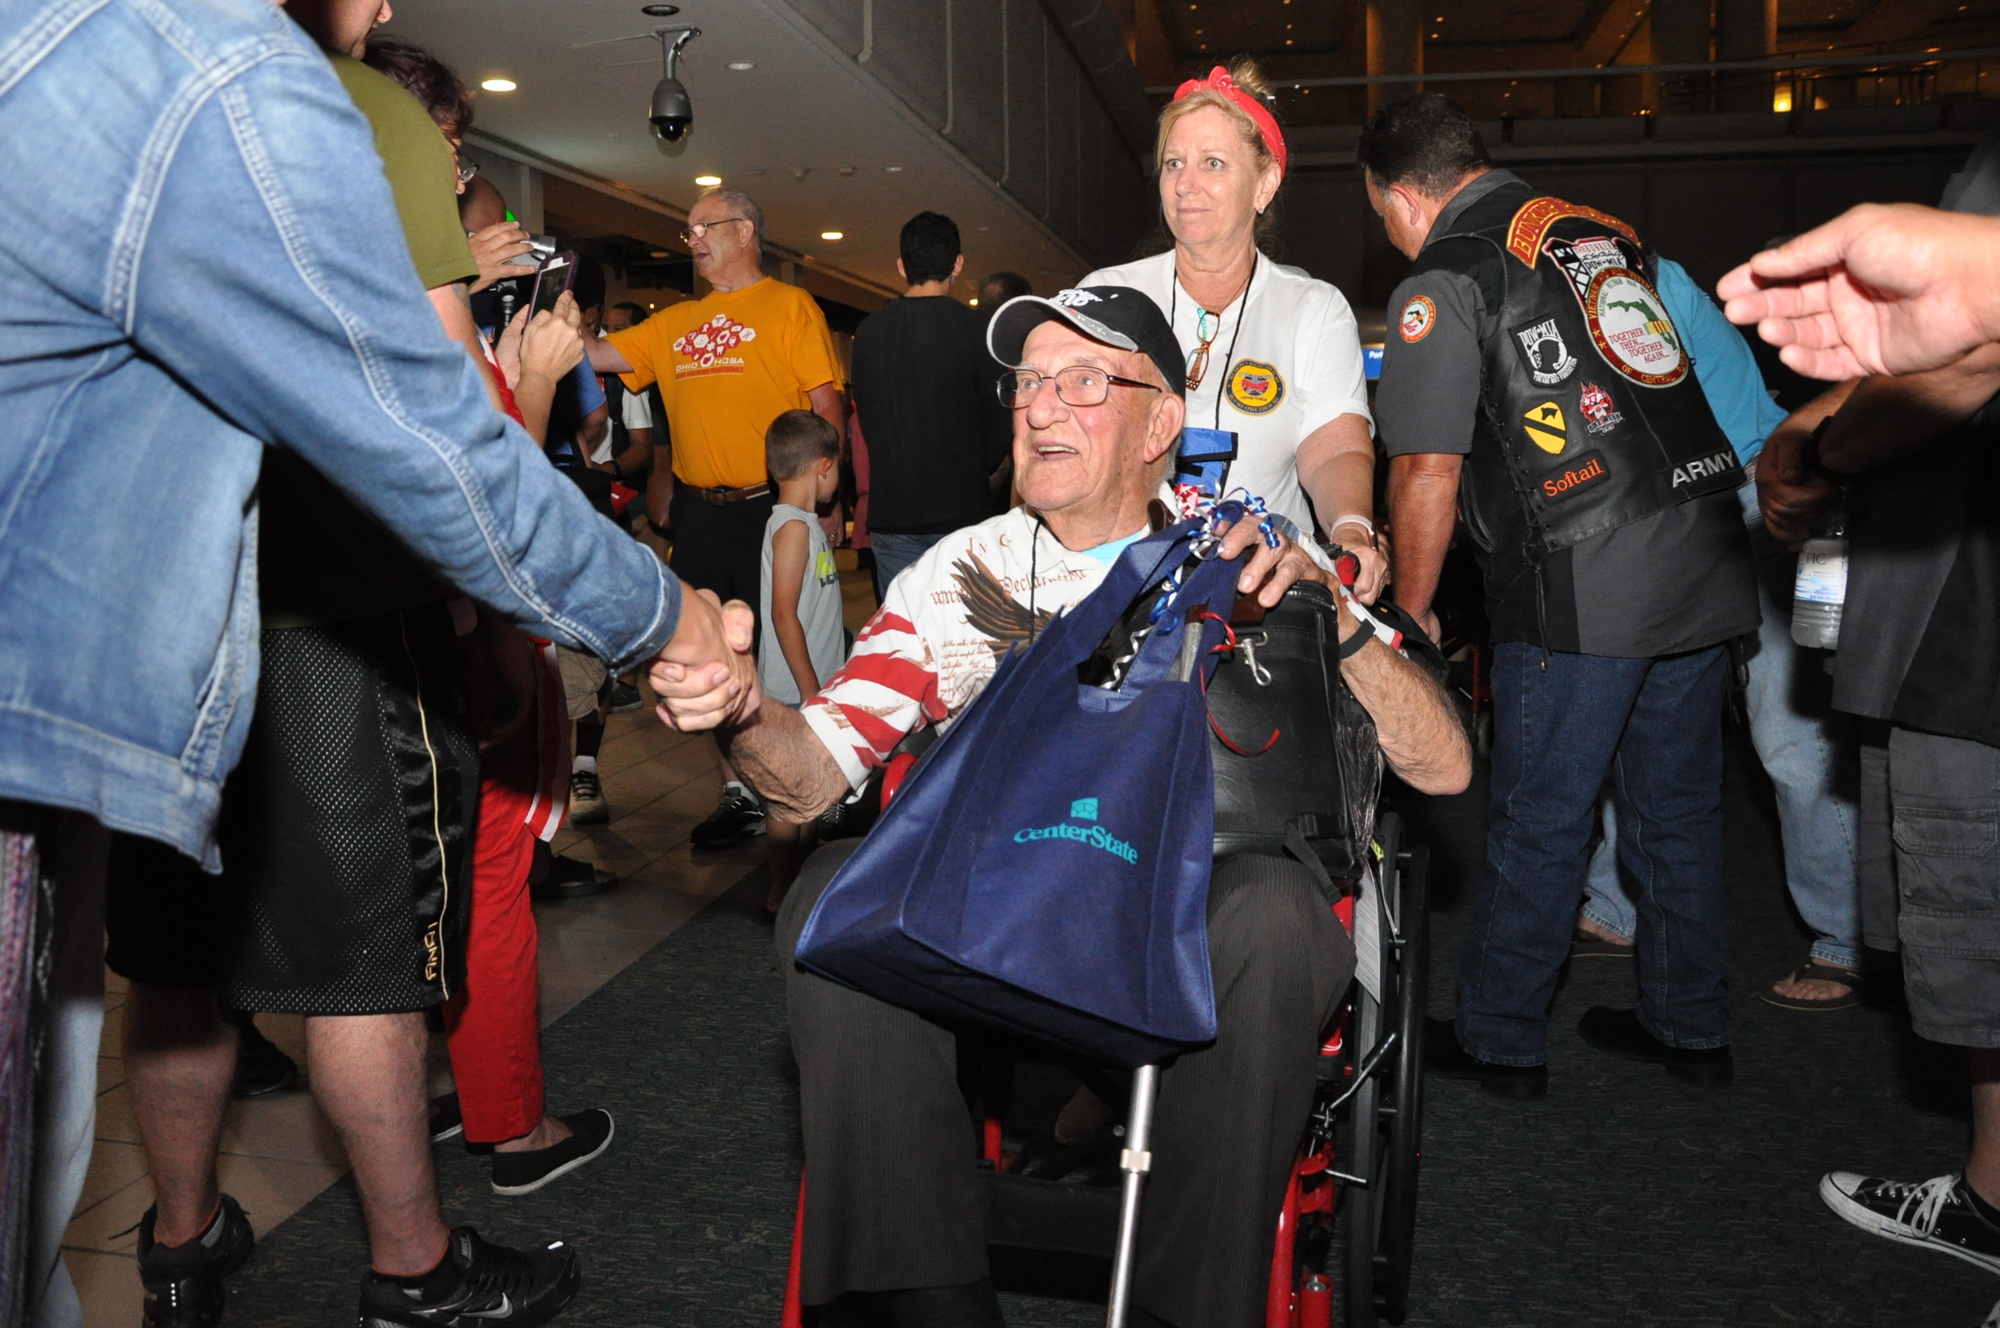 World War II veteran Bill Murray enjoyed the recognition he received during the Honor Flight. Photo by Tim Freed